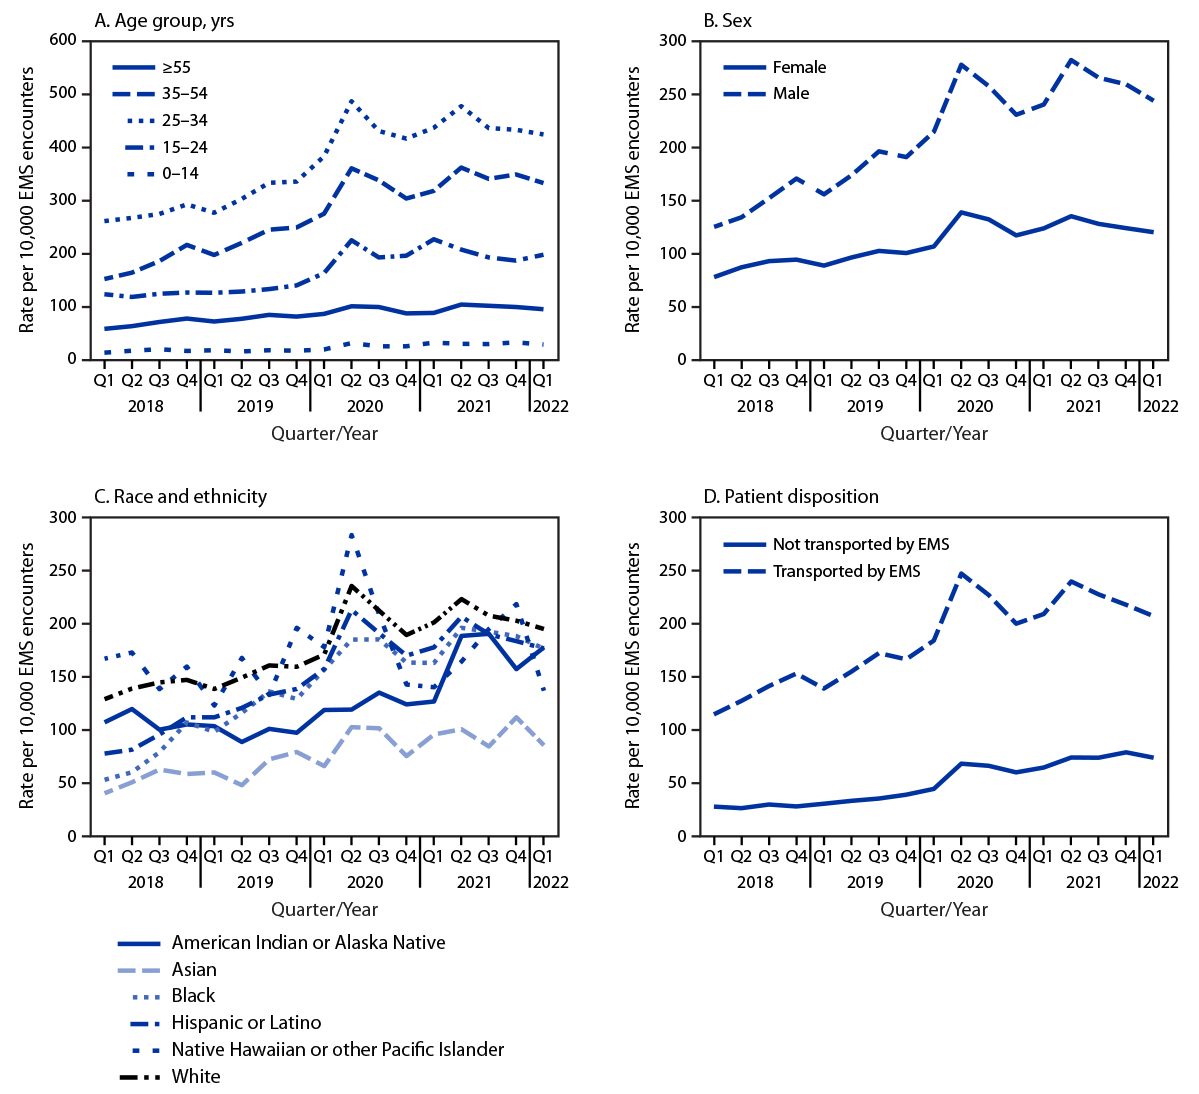 The figure consists of four line charts showing quarterly nonfatal opioid-involved overdose rates in 491 counties in the United States by age group (panel A), sex (panel B), race and ethnicity (panel C), and patient disposition (panel D) during January 2018–March 2022.